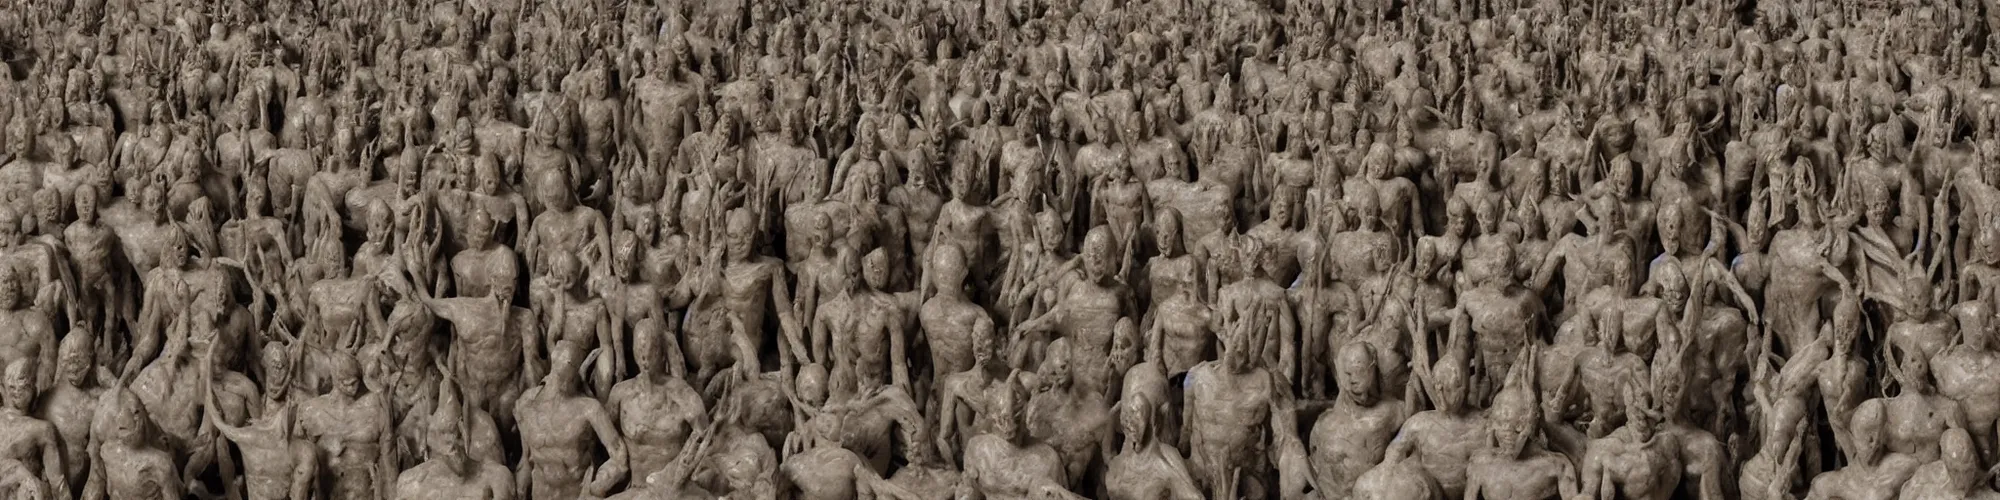 Prompt: hundreds of humans. A sea of humans. interconnected flesh. Melting clay golem humans. Dungeons&Dragons: Lemure. Lemure creature. Demonic scene. Many humans intertwined and woven together. Bodies and forms amesh. Extremely unsettling artwork. Clay sculpture by Alberto Giacometti.